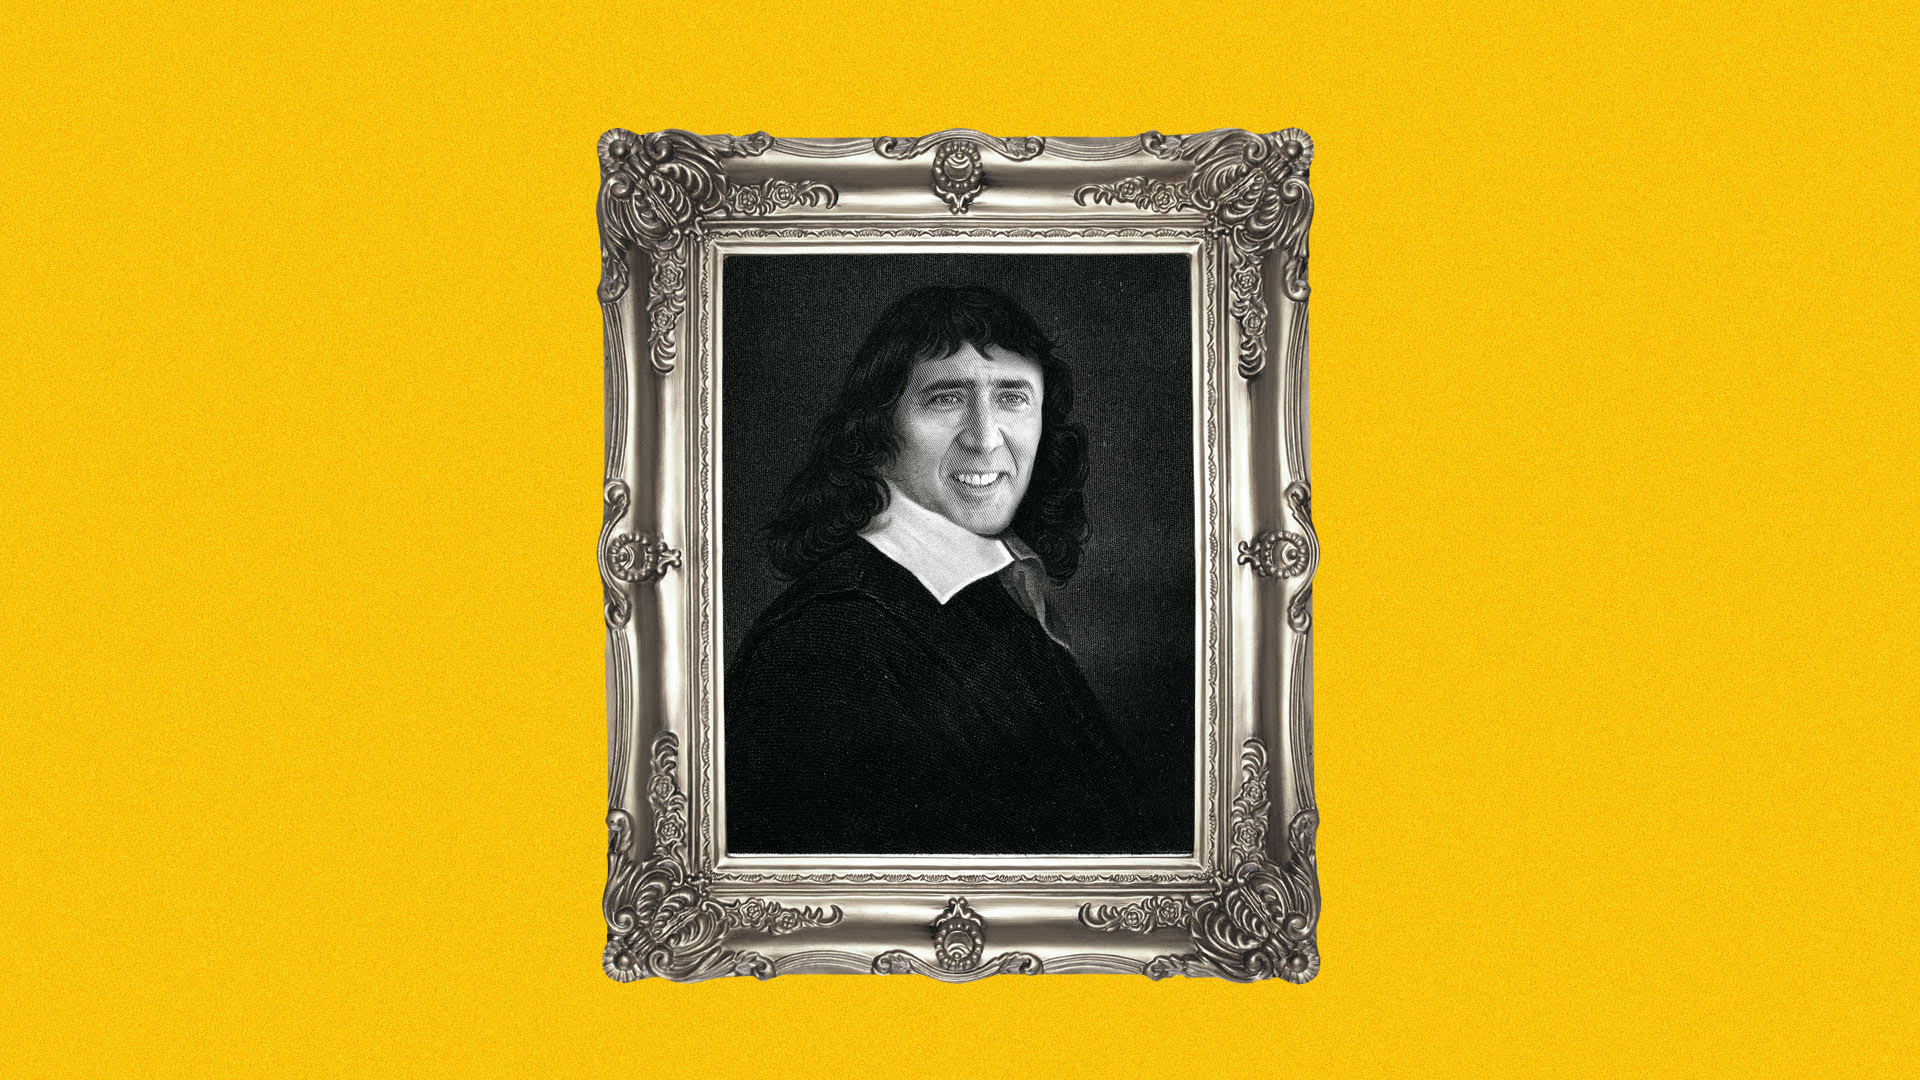 Illustration of René Descartes with Nicholas Cage's face in an ornate frame.